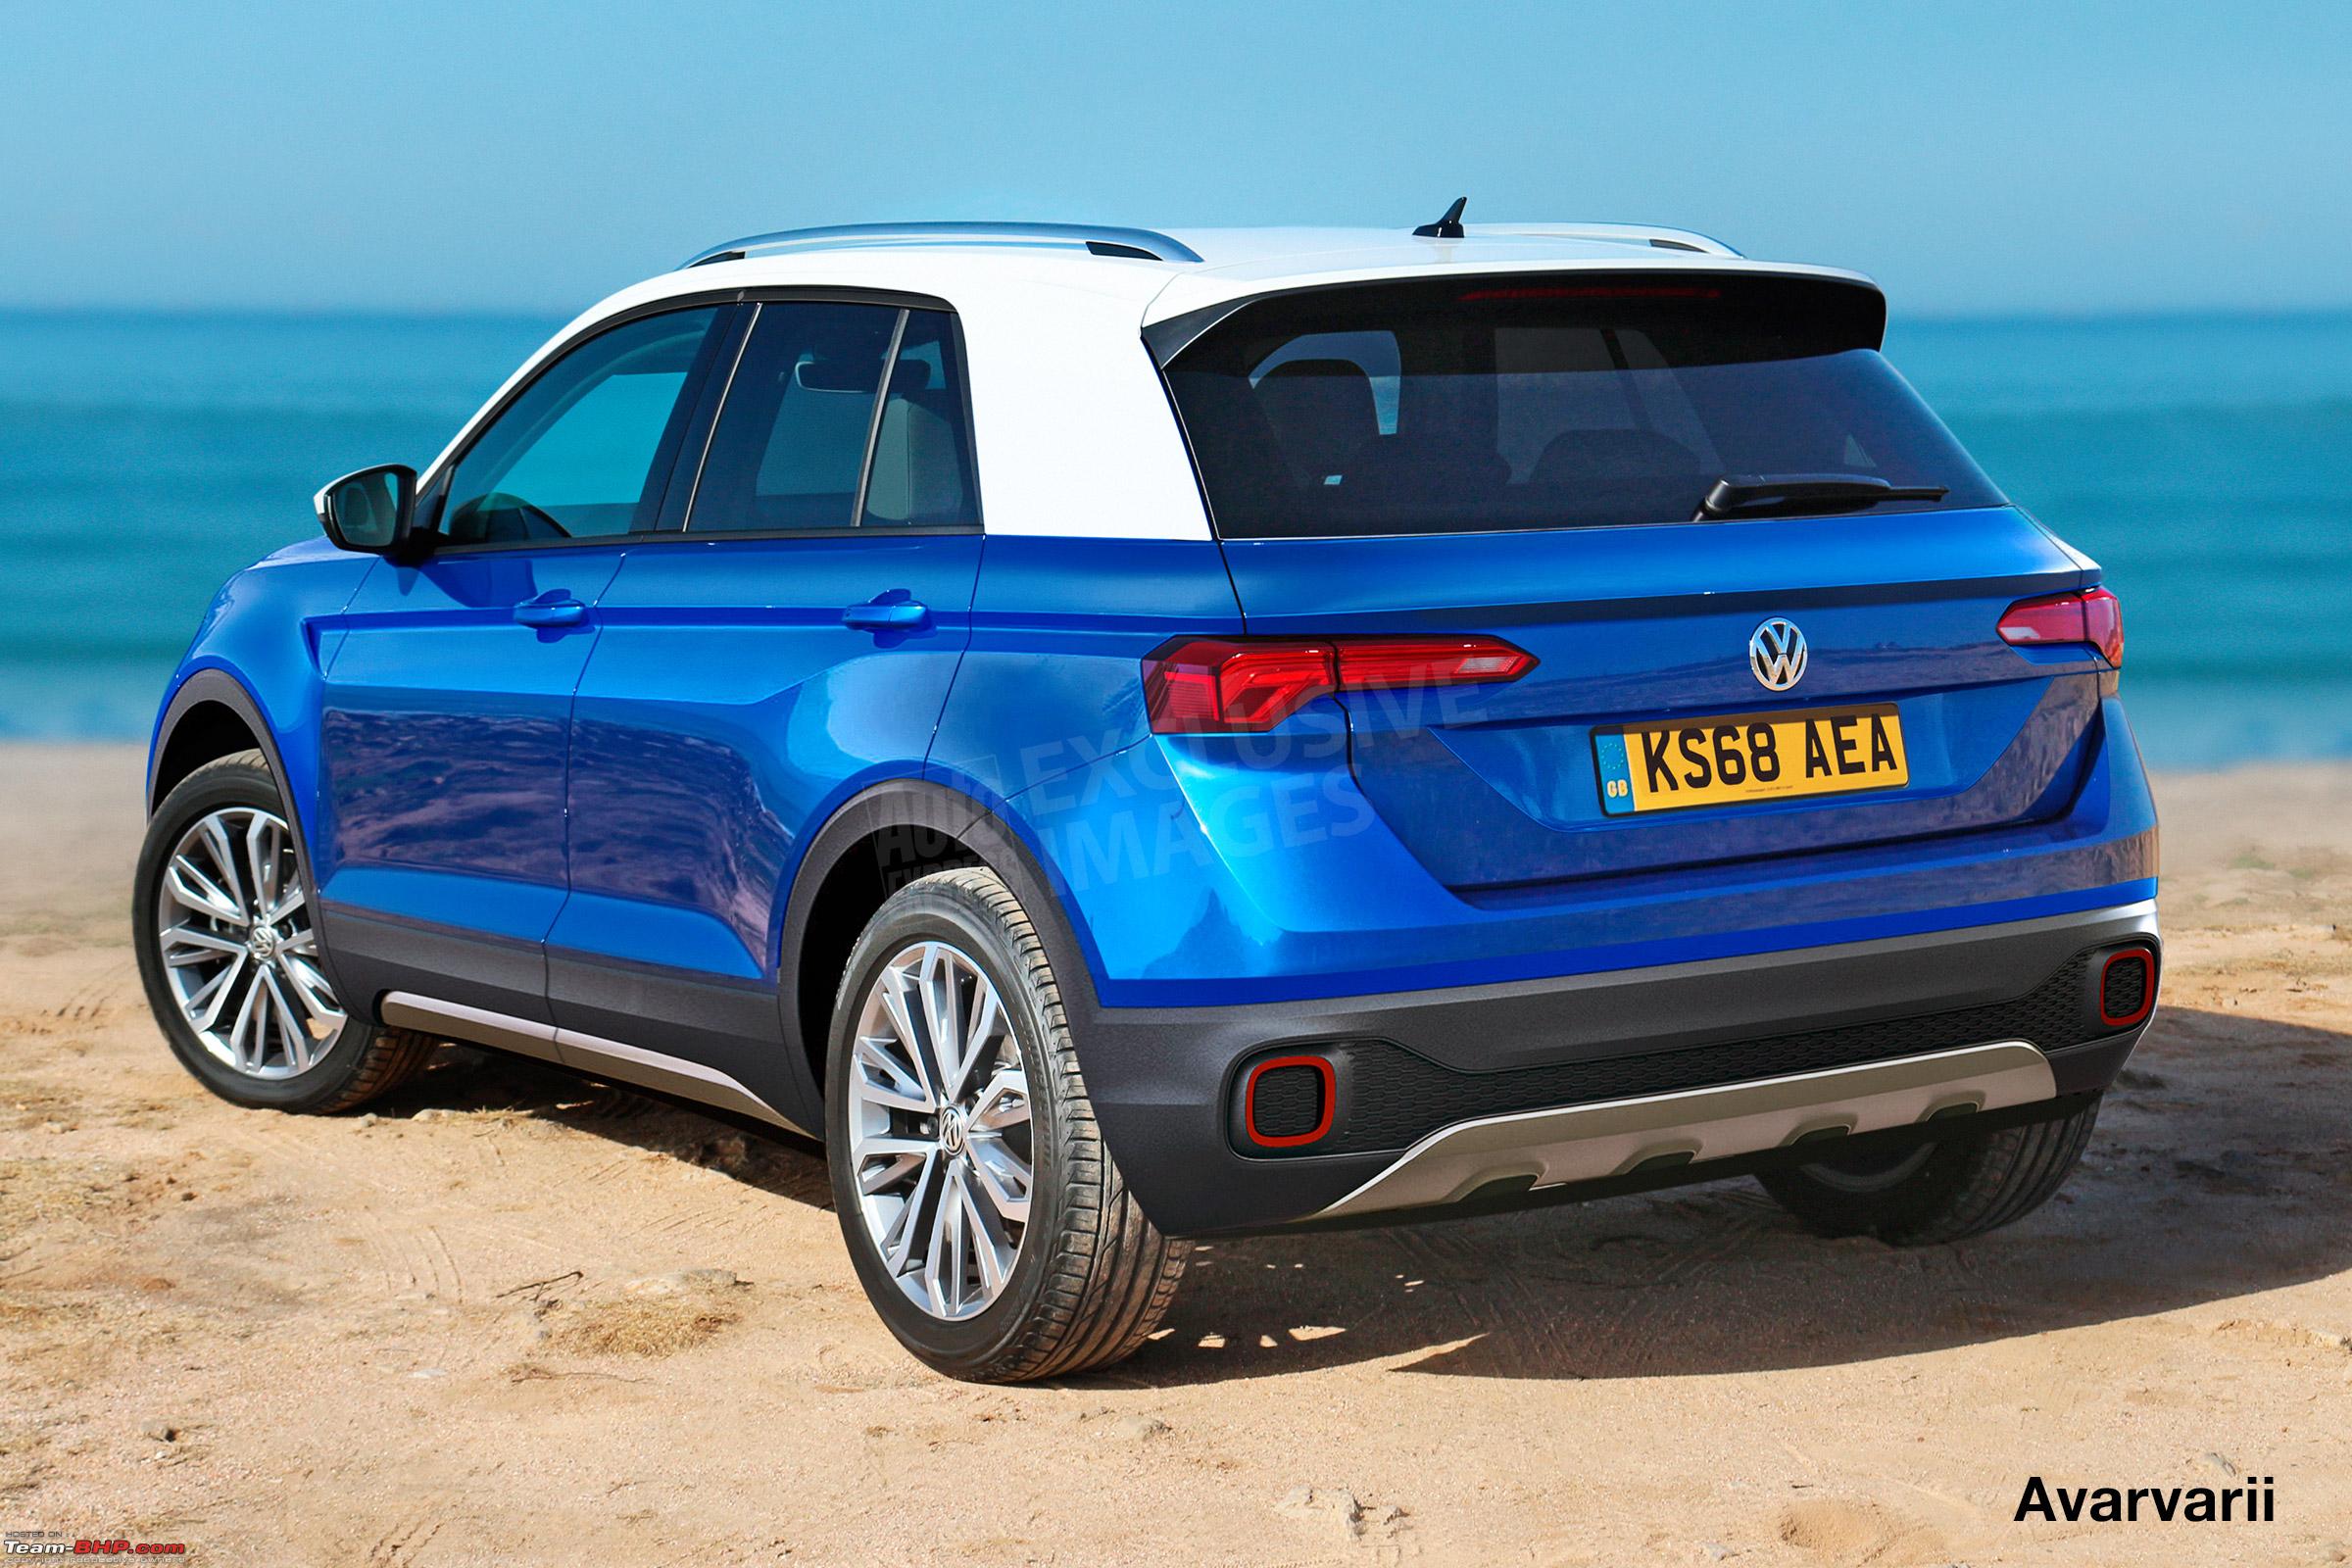 Volkswagen T Cross - A Compact Crossover based on the Polo ...